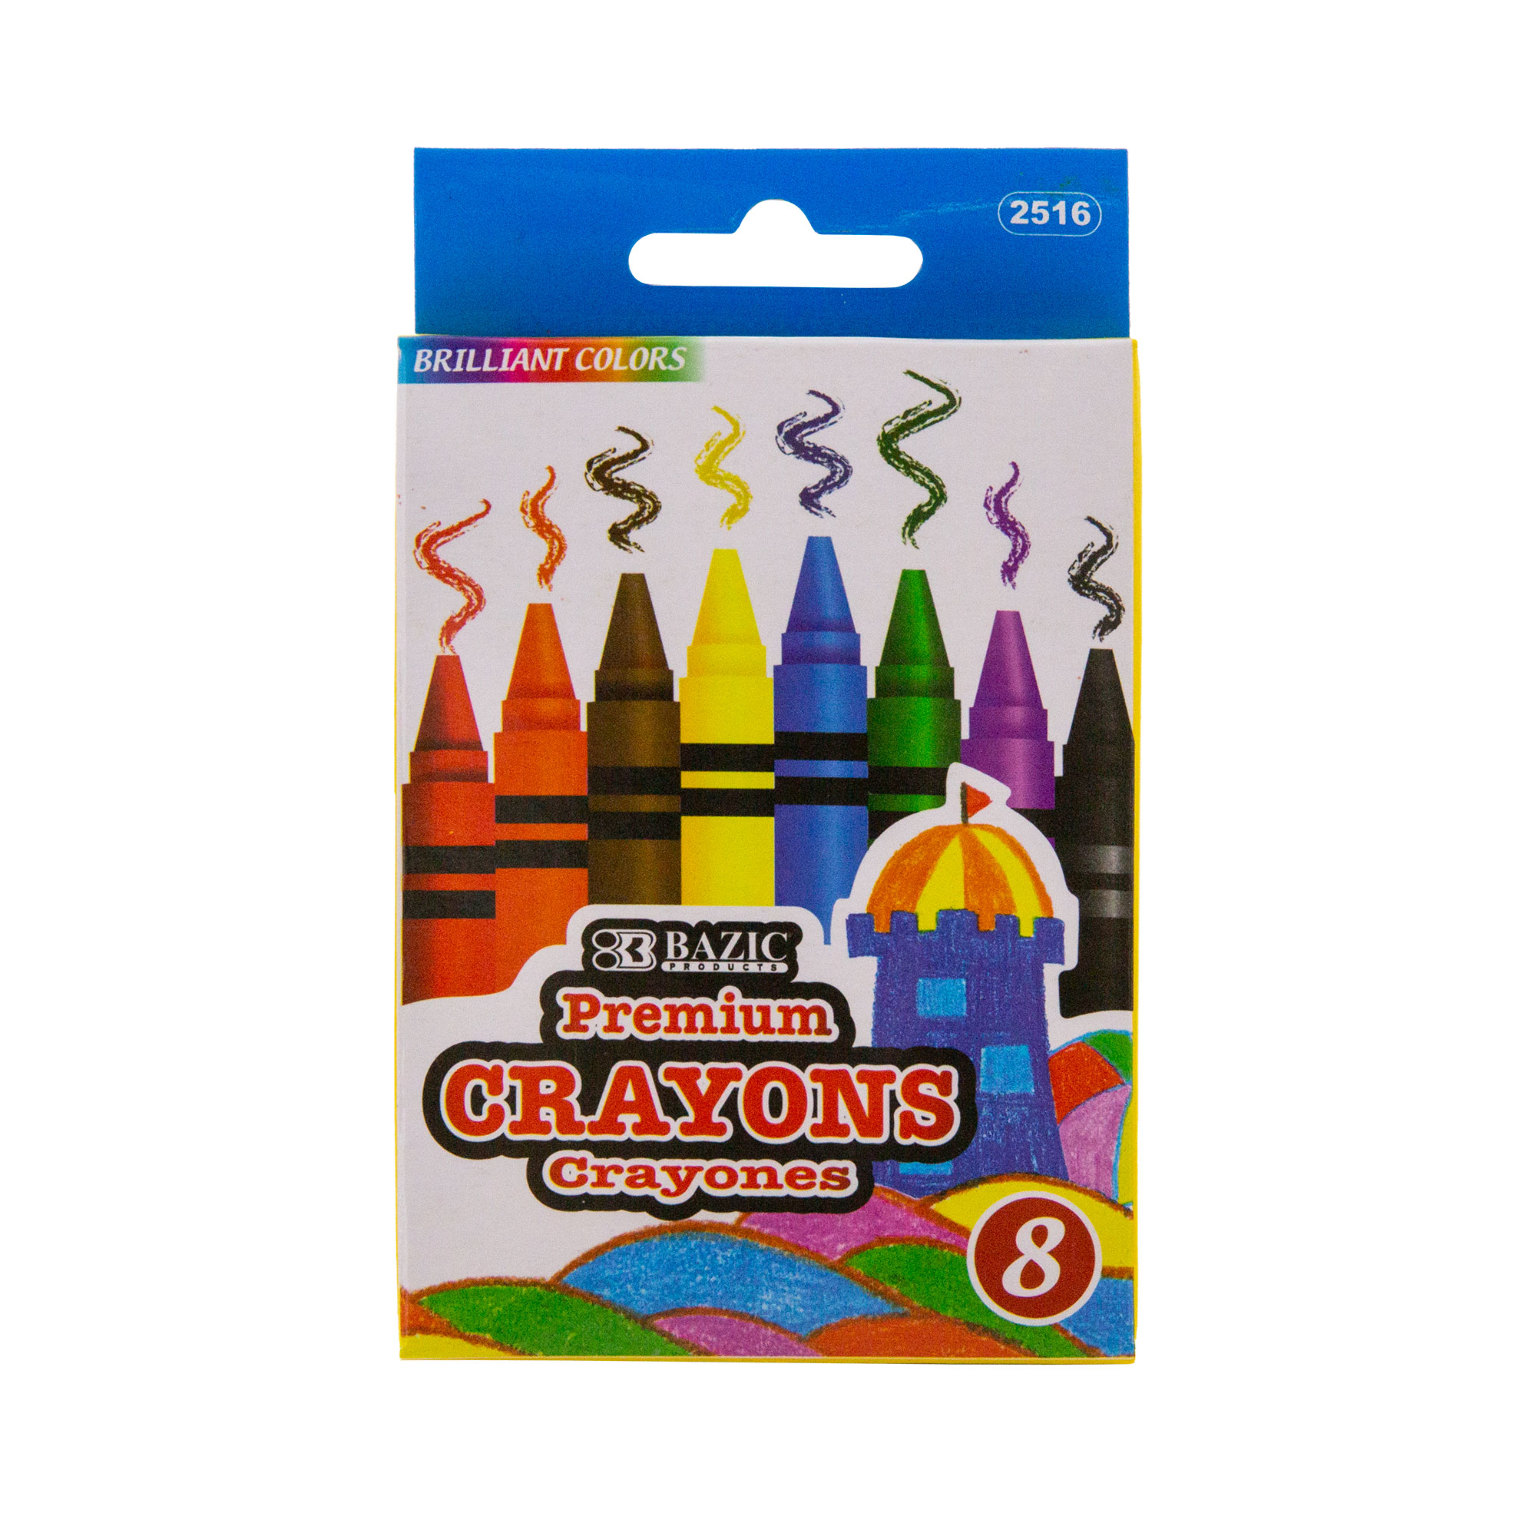 New In Box - 2 Pack Crayola Glitter Crayons - 8 Count per Box